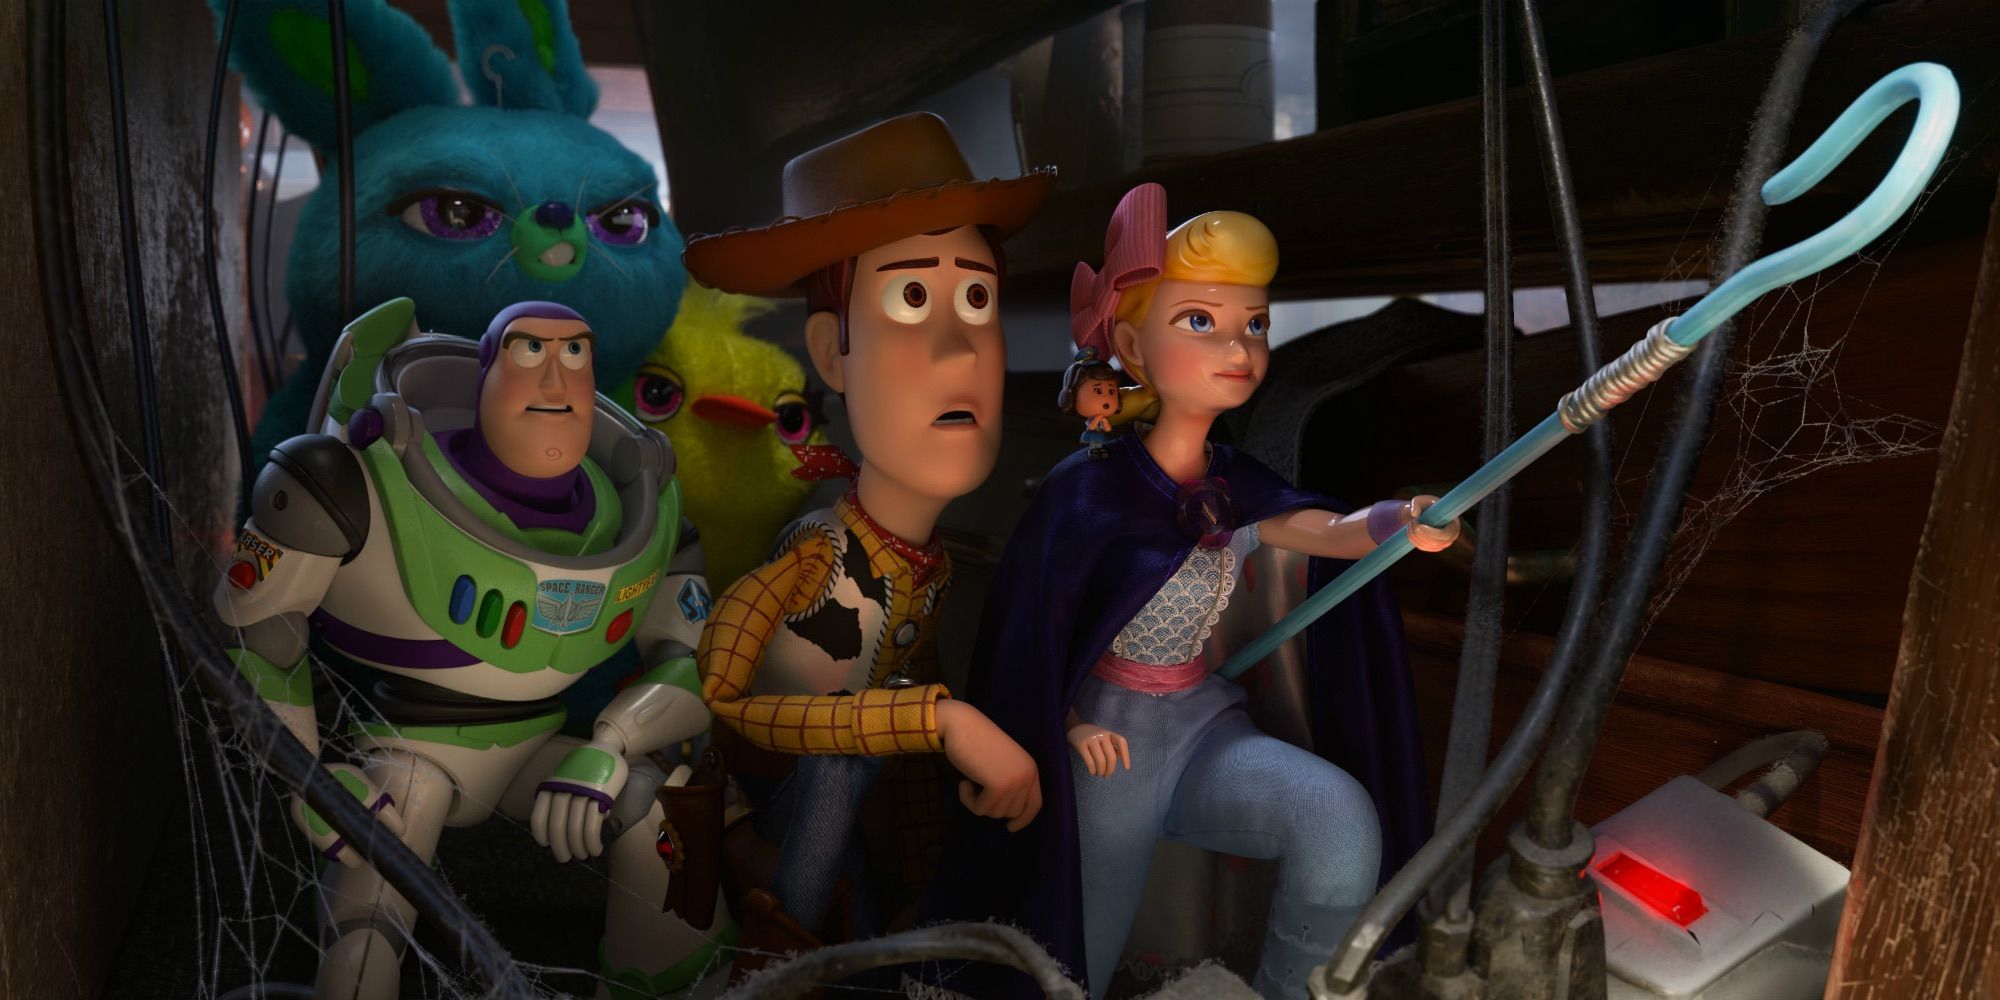  Buzz, Bunny, Ducky, Woody, and Bo Peep in Toy Story 4